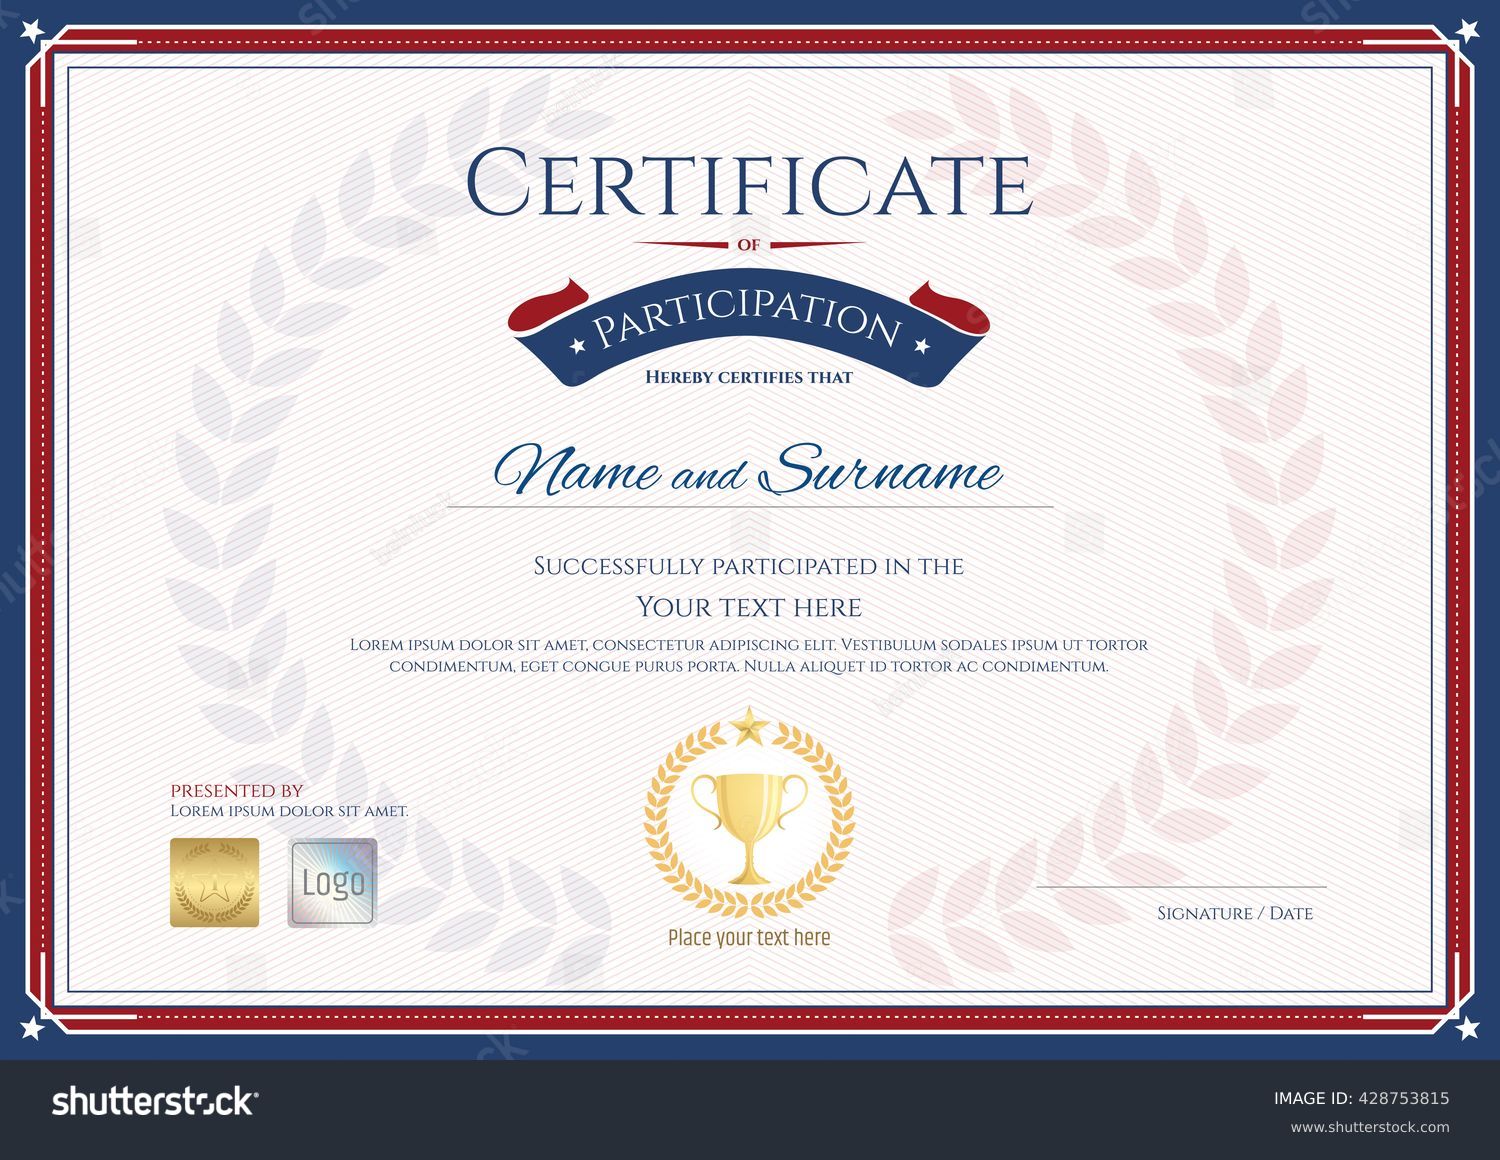 Certificate Participation Template Sport Theme Gold Stock Vector With Regard To Certification Of Participation Free Template